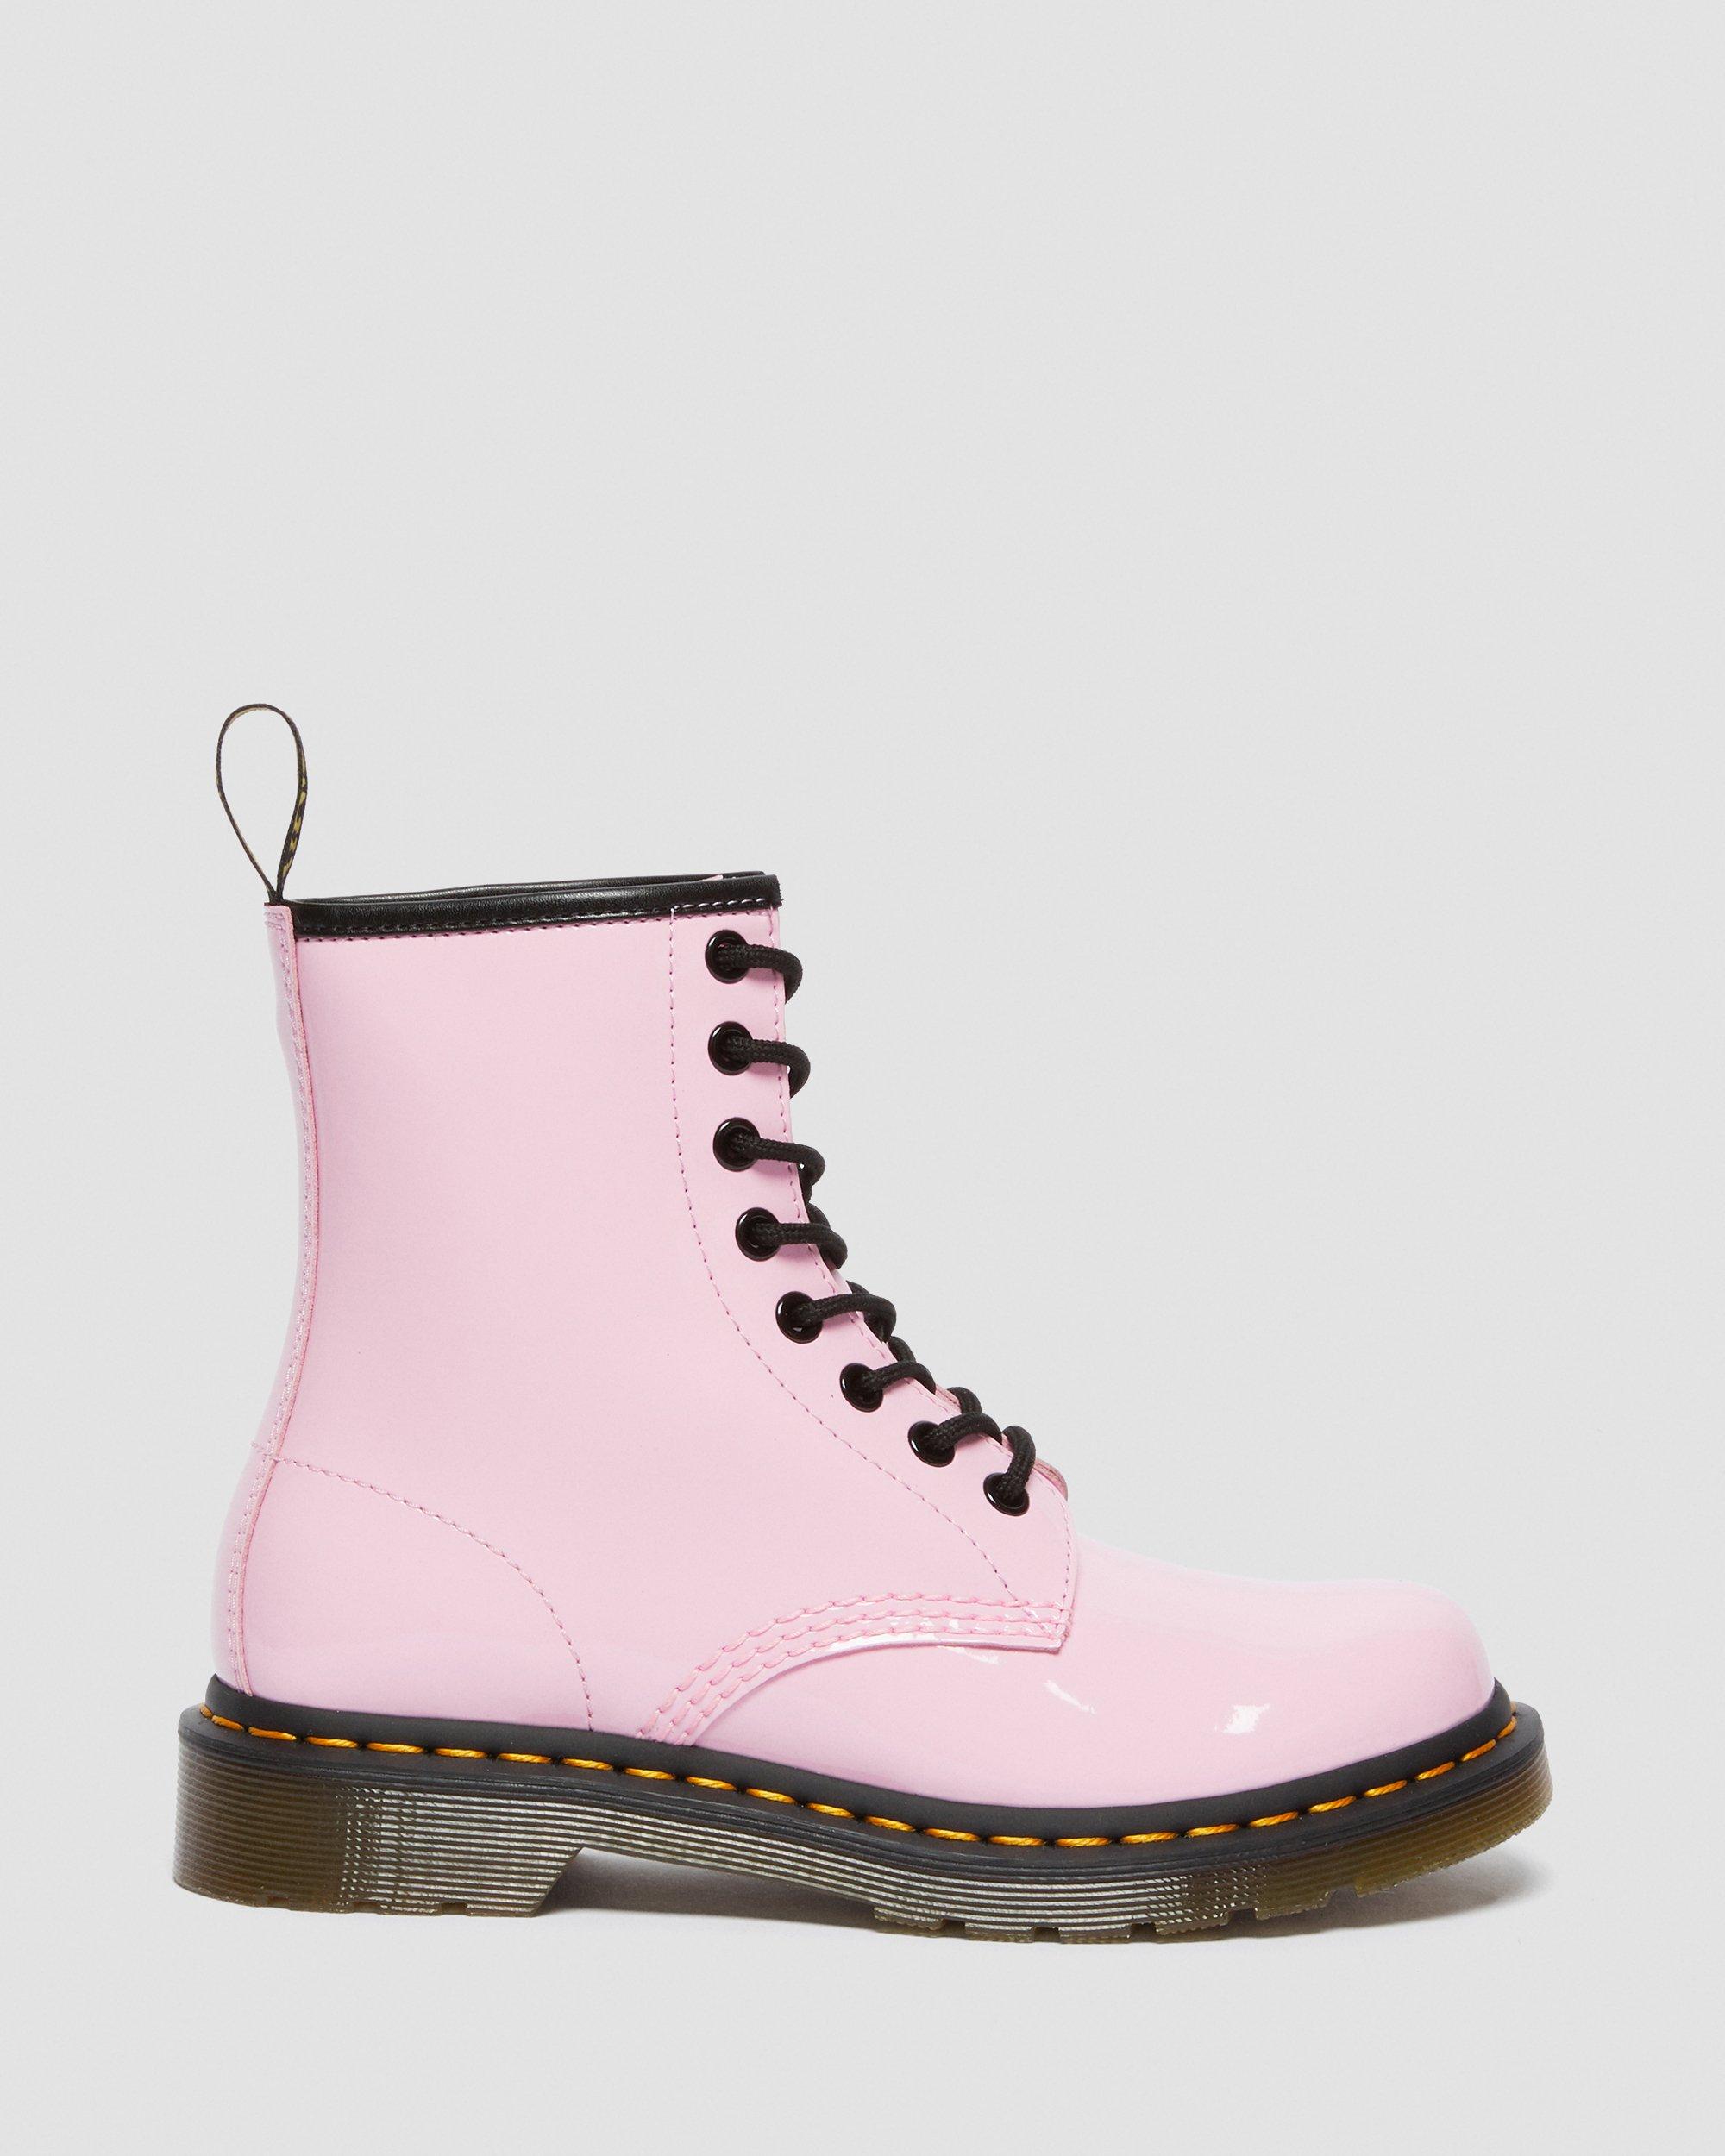 1460 Patent Leather Lace Up Boots in Pale Pink | Dr. Martens